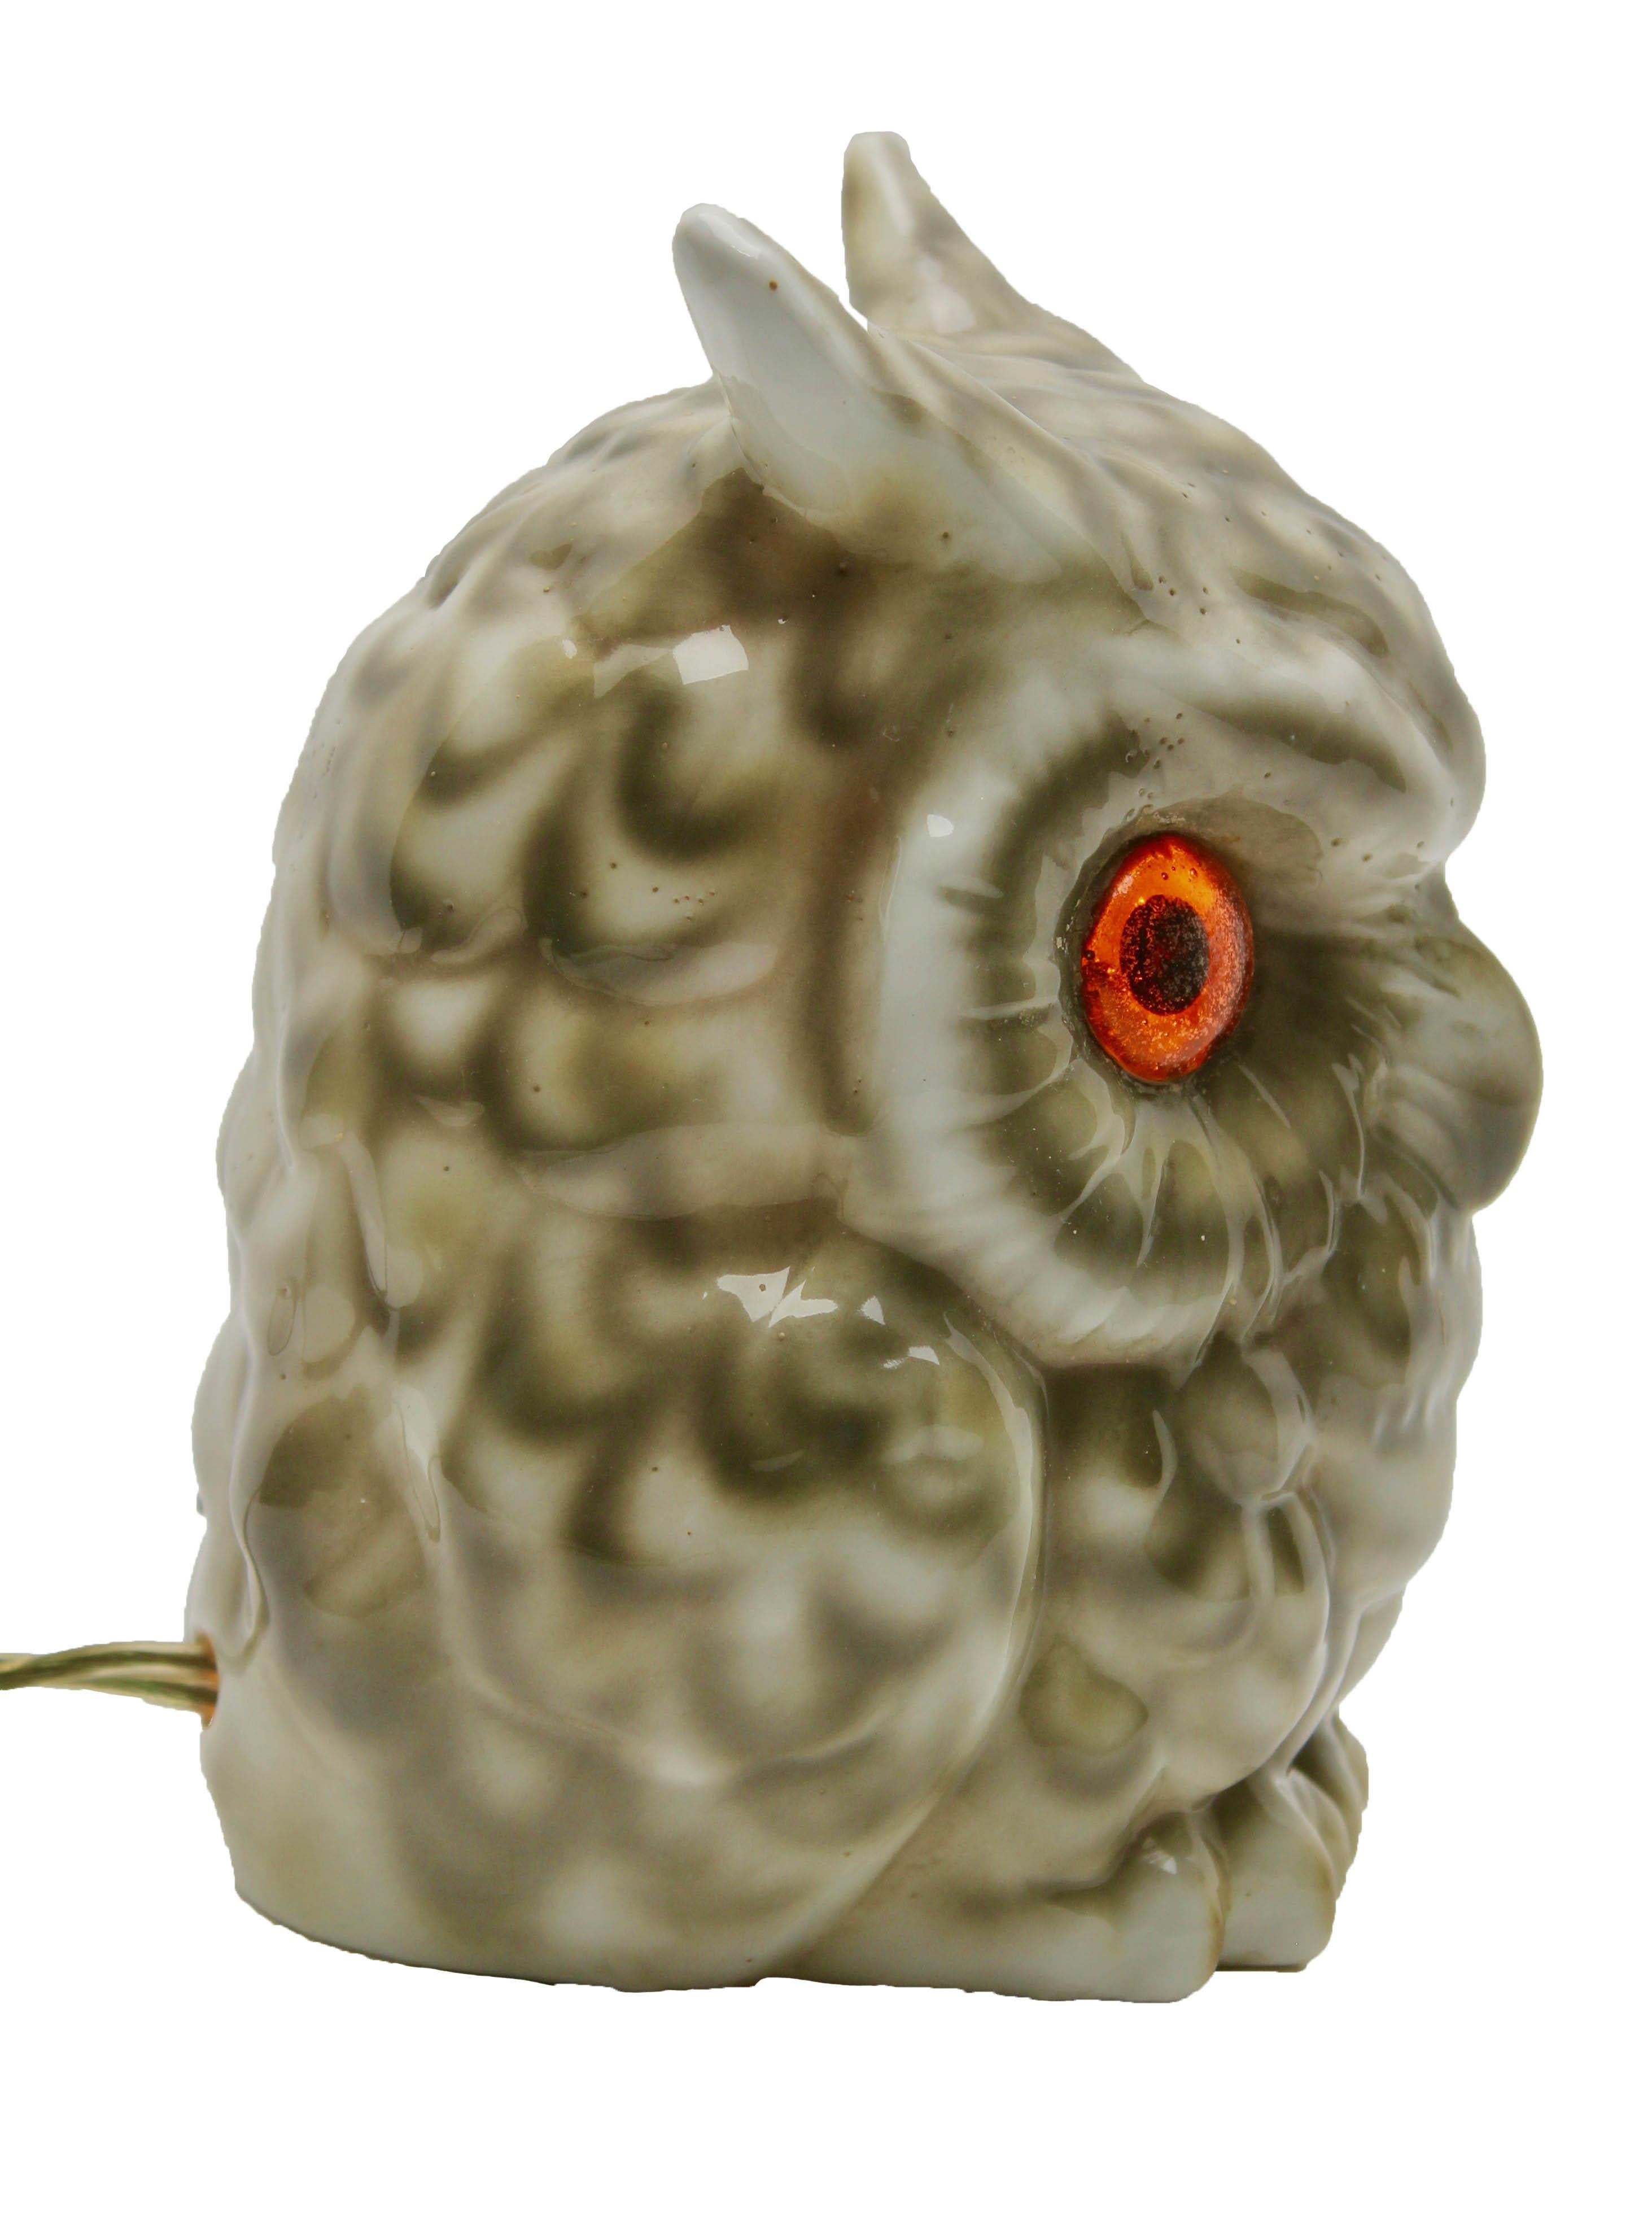 Germany, 1950s, excellent condition
Porcelain figurine table lamp. Owl Frome 1947s. Undamaged original condition. The lighting works. is in very good, clean and undamaged state of conservation. The Owl has brown glass eyes.
Original cable. In full